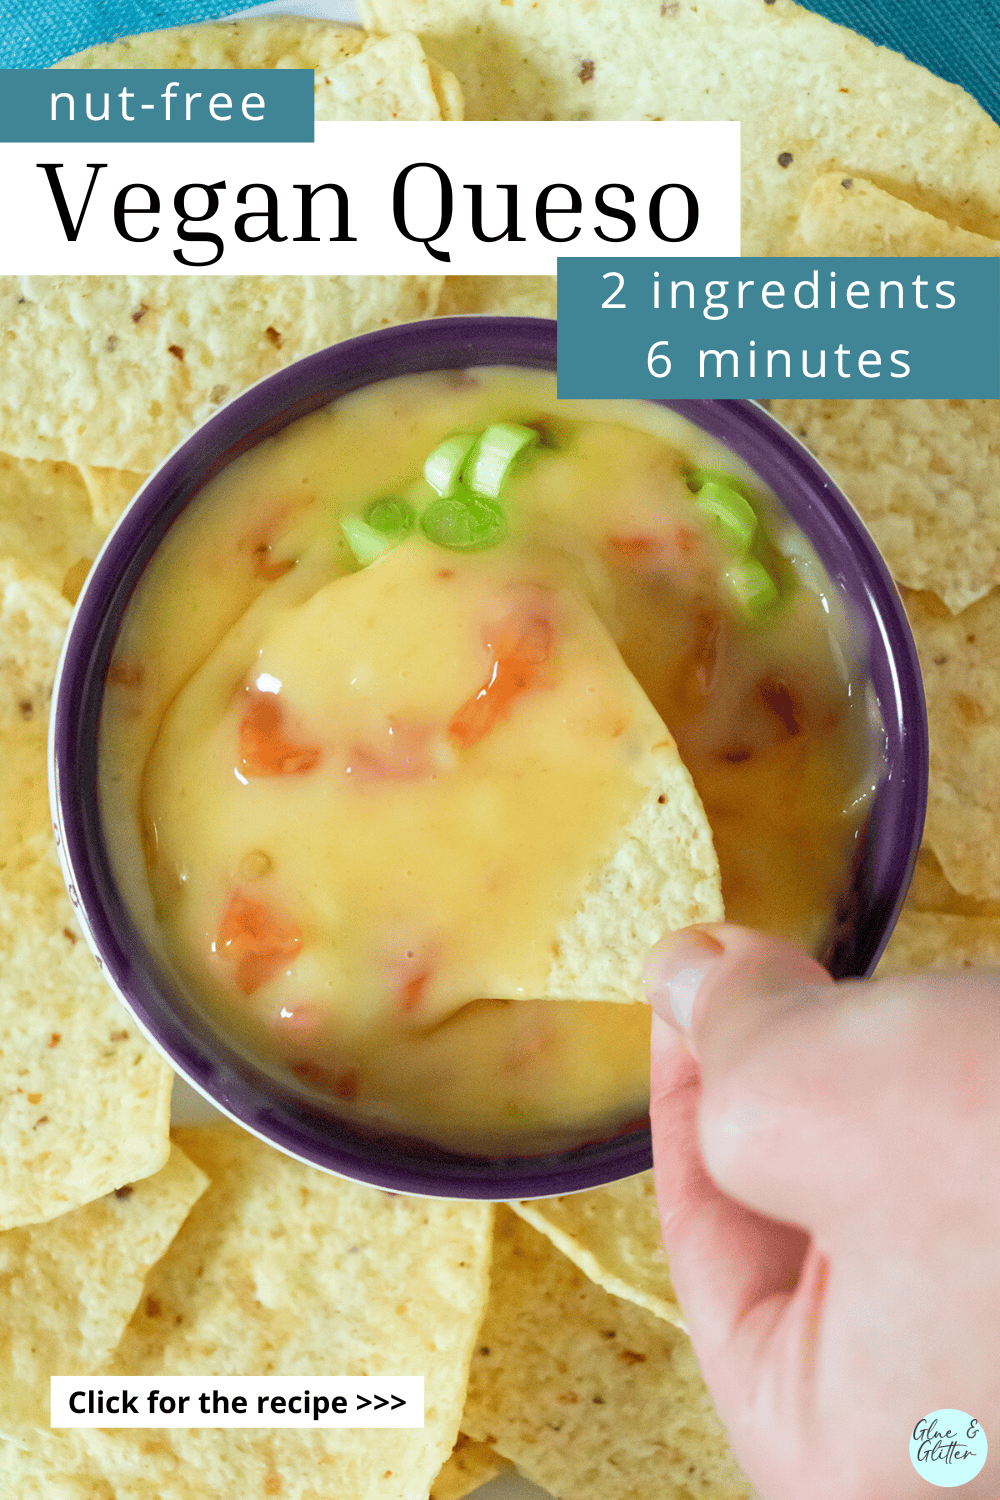 hand dipping a chip into vegan queso, text overlay